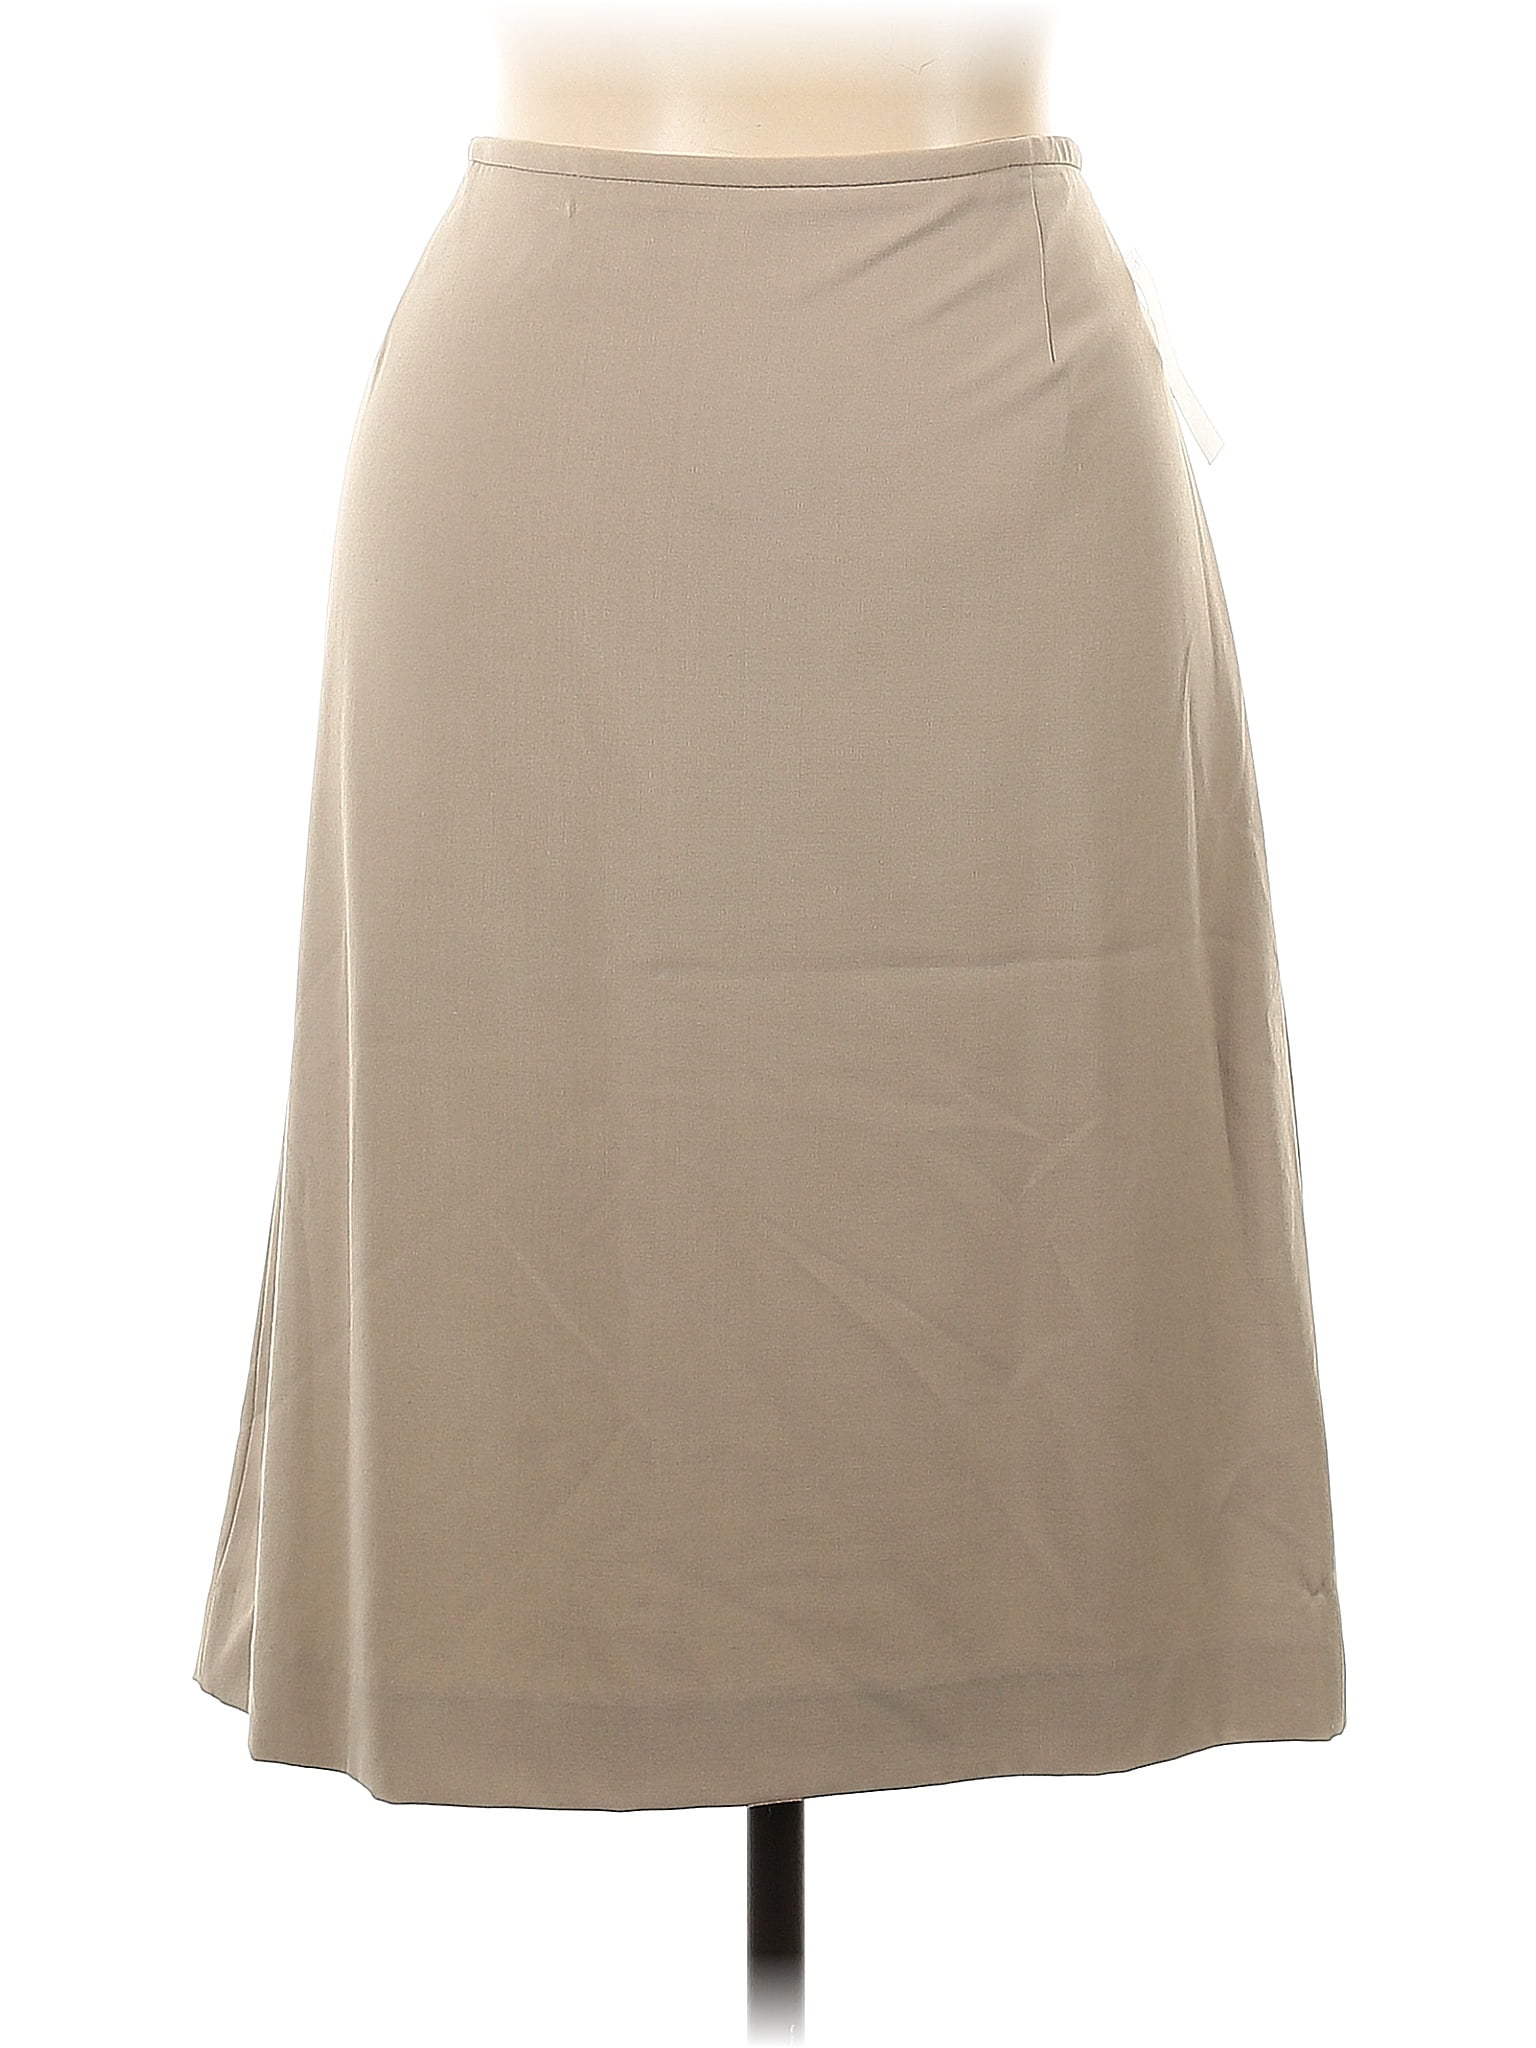 Tahari by ASL Solid Tan Casual Skirt Size 16 - 75% off | thredUP